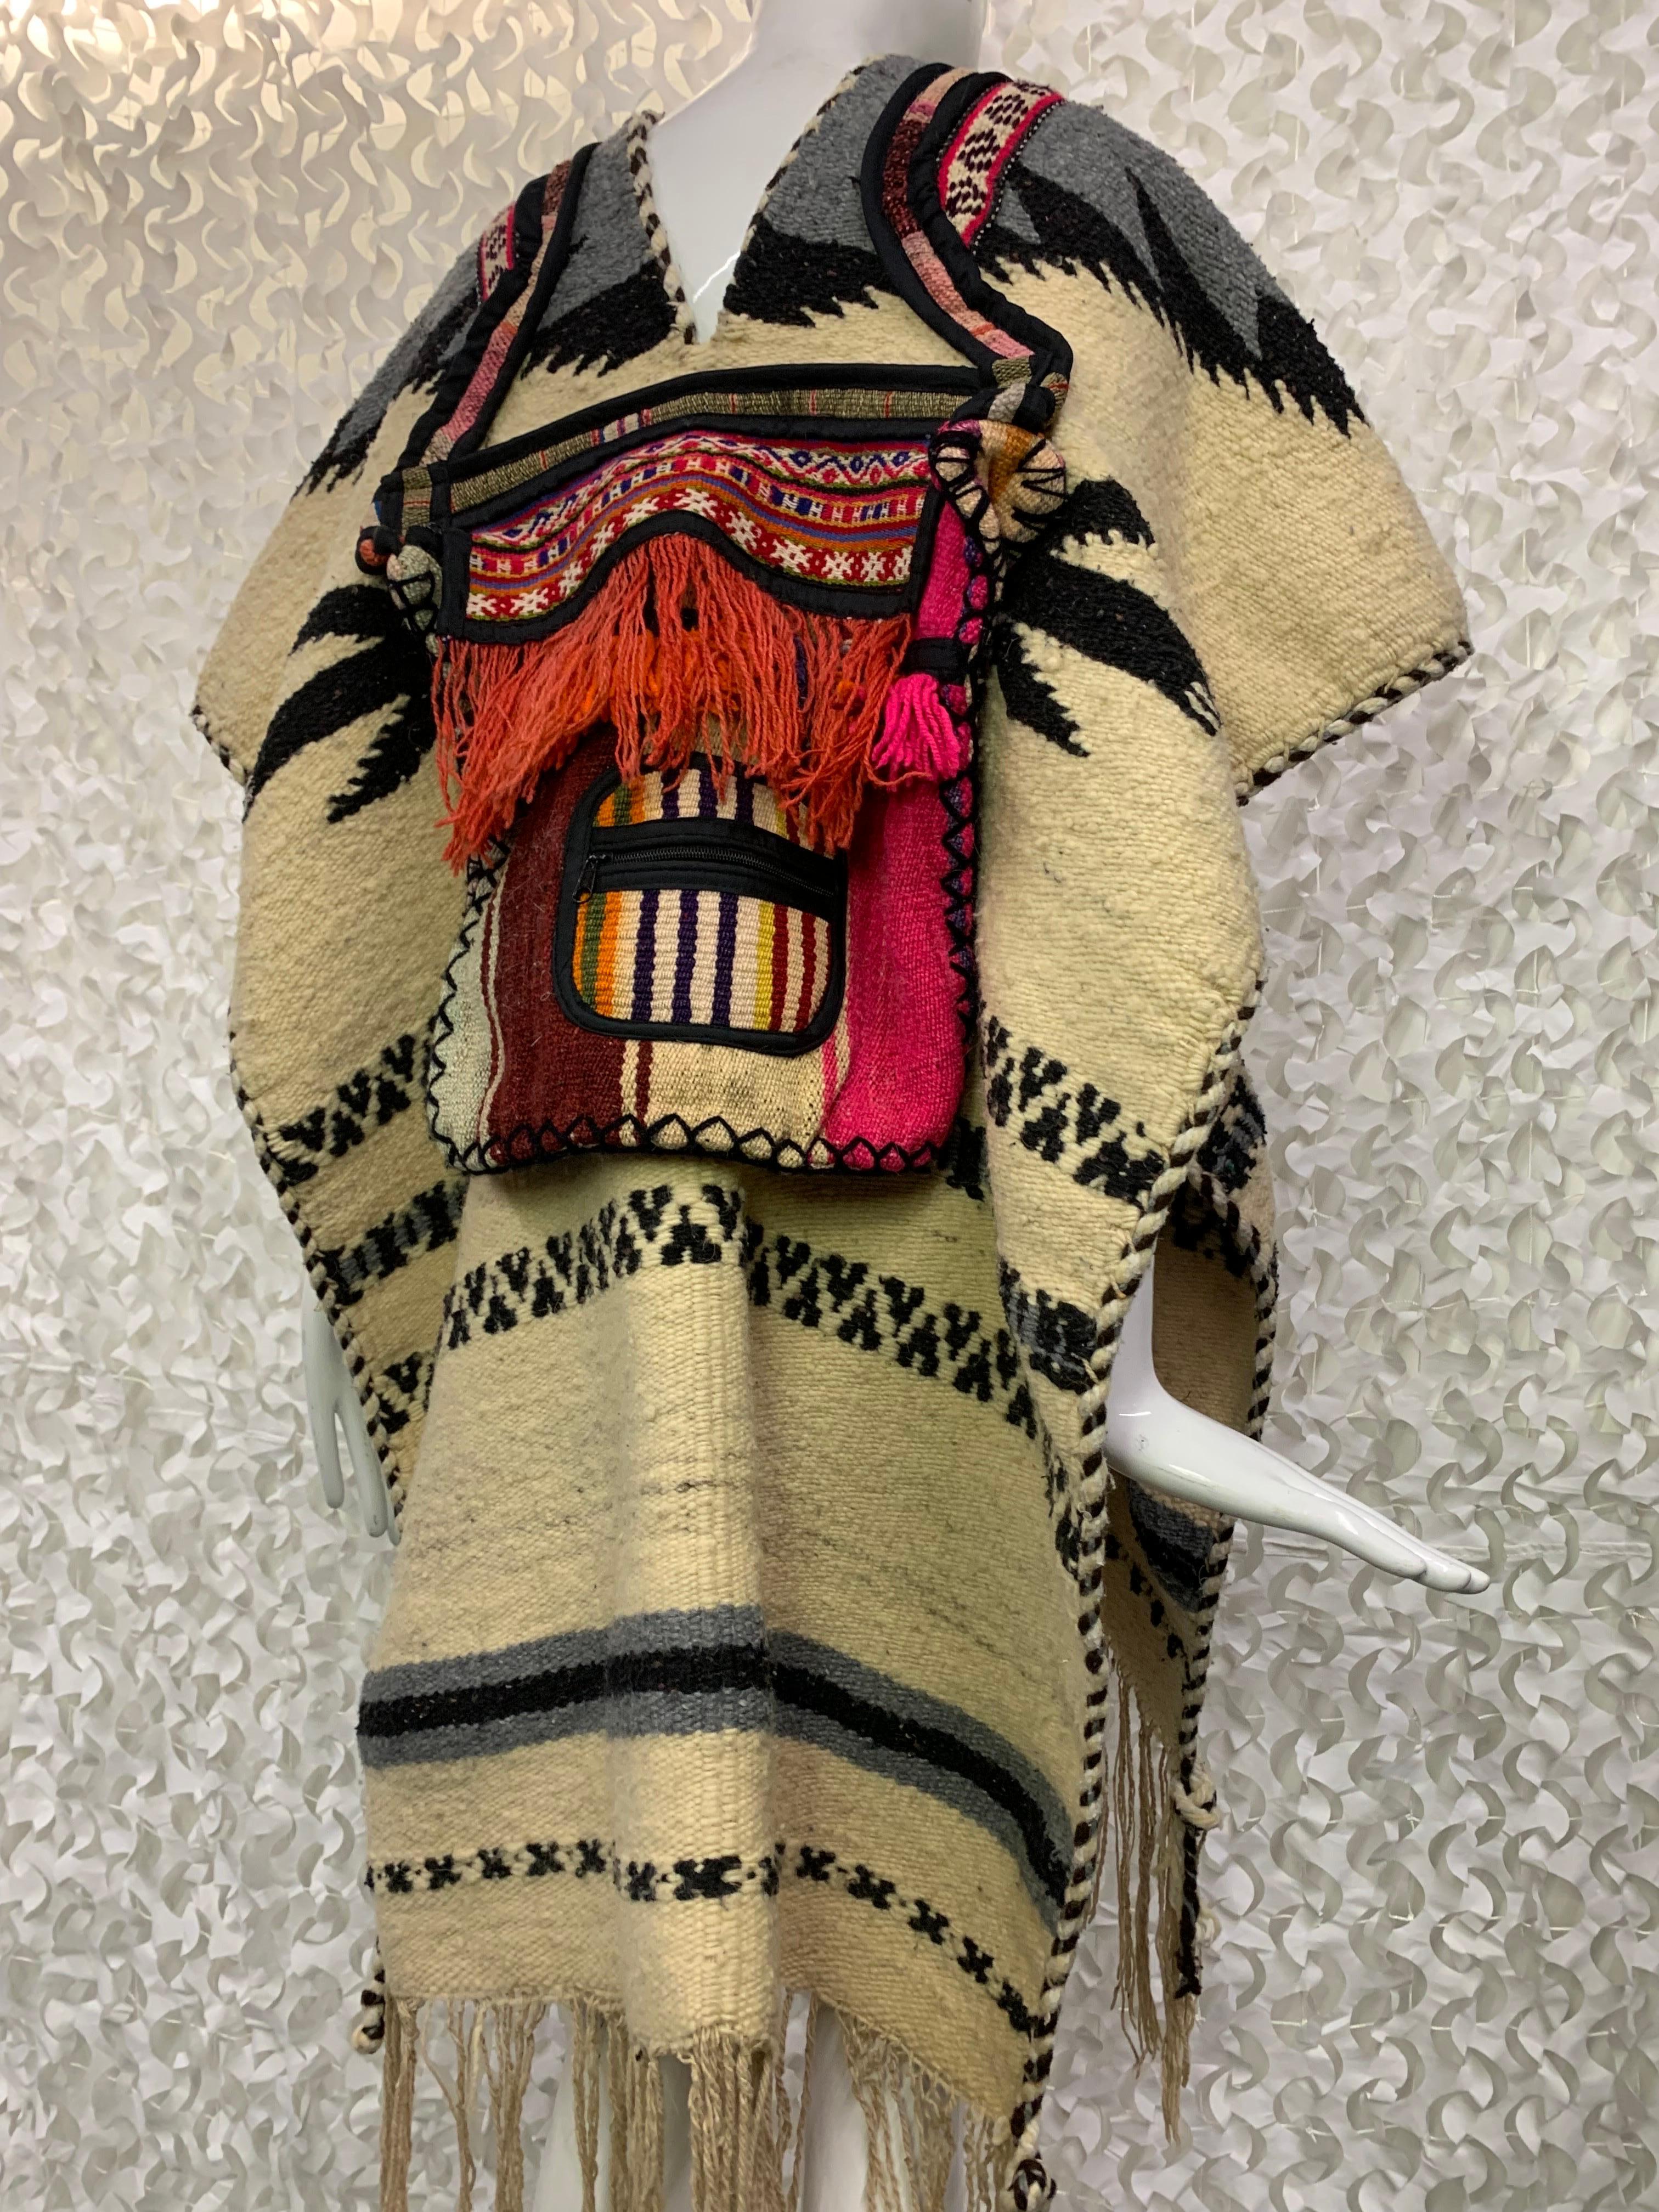 Torso Creations Hand-Woven Folkloric Poncho w Colorfully Woven Pouch Pockets:  We've taken liberties with a traditional South American wool poncho and added hand-made front and back pouch pockets in colorful fringe. Front diamond pocket has side zip